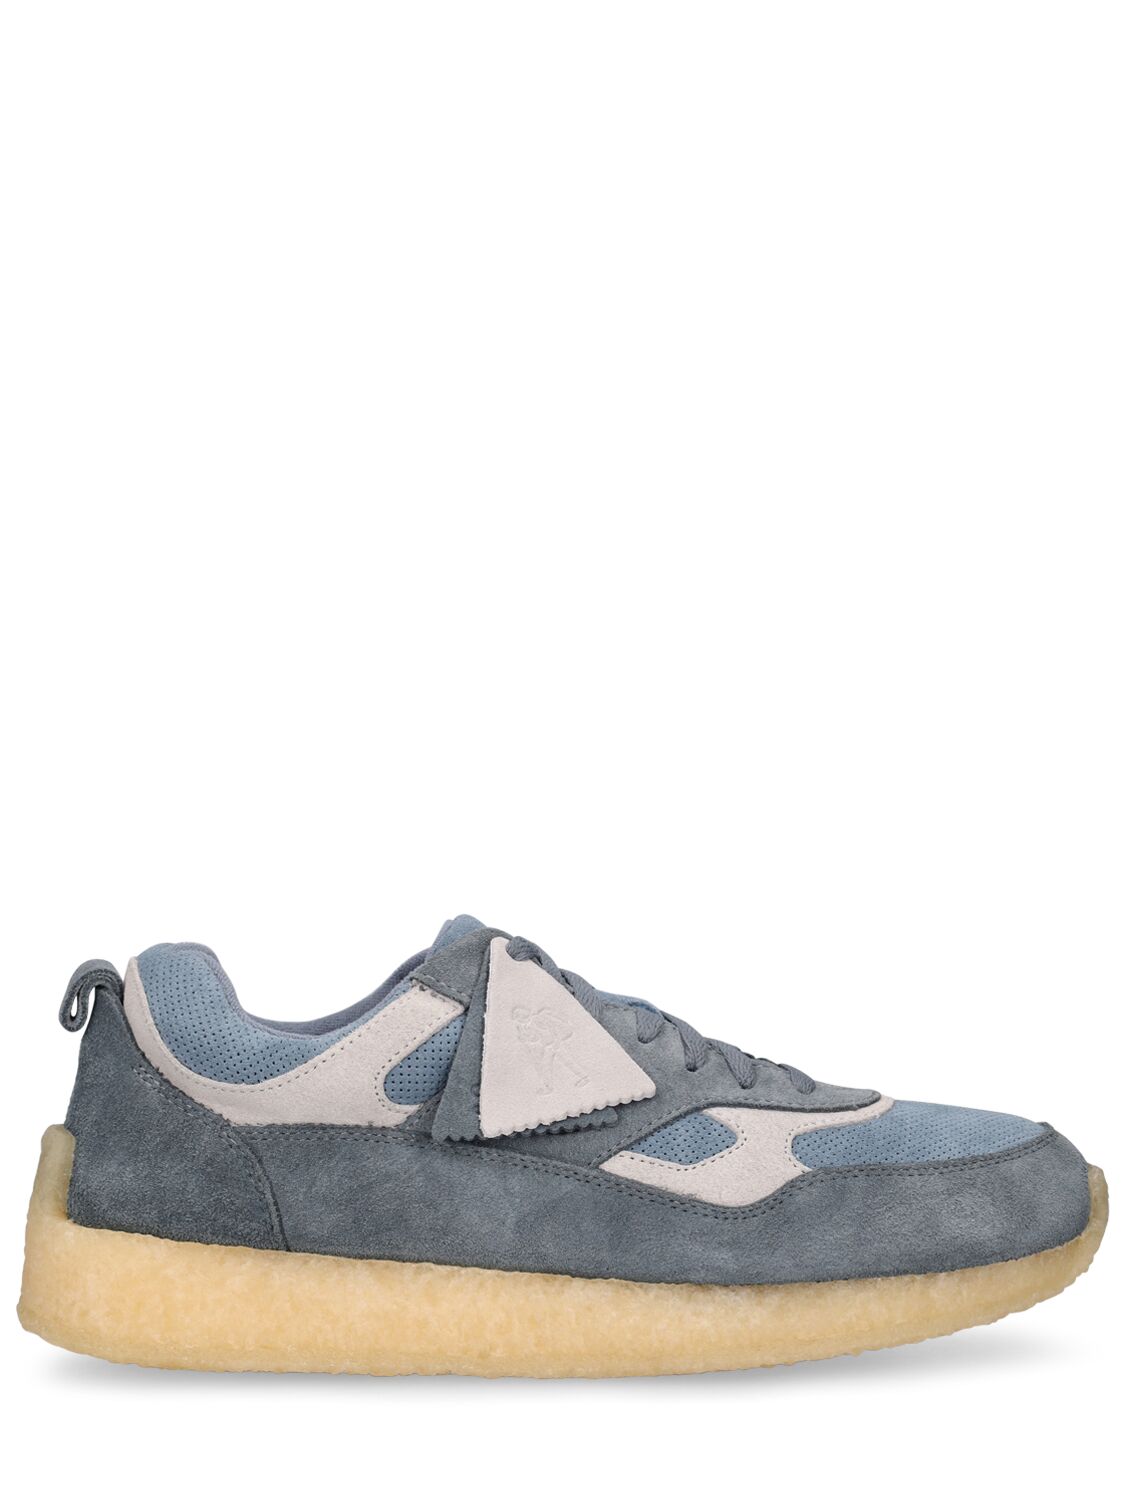 Clarks Originals Lockhill Suede Lace-up Shoes In Blue,grey